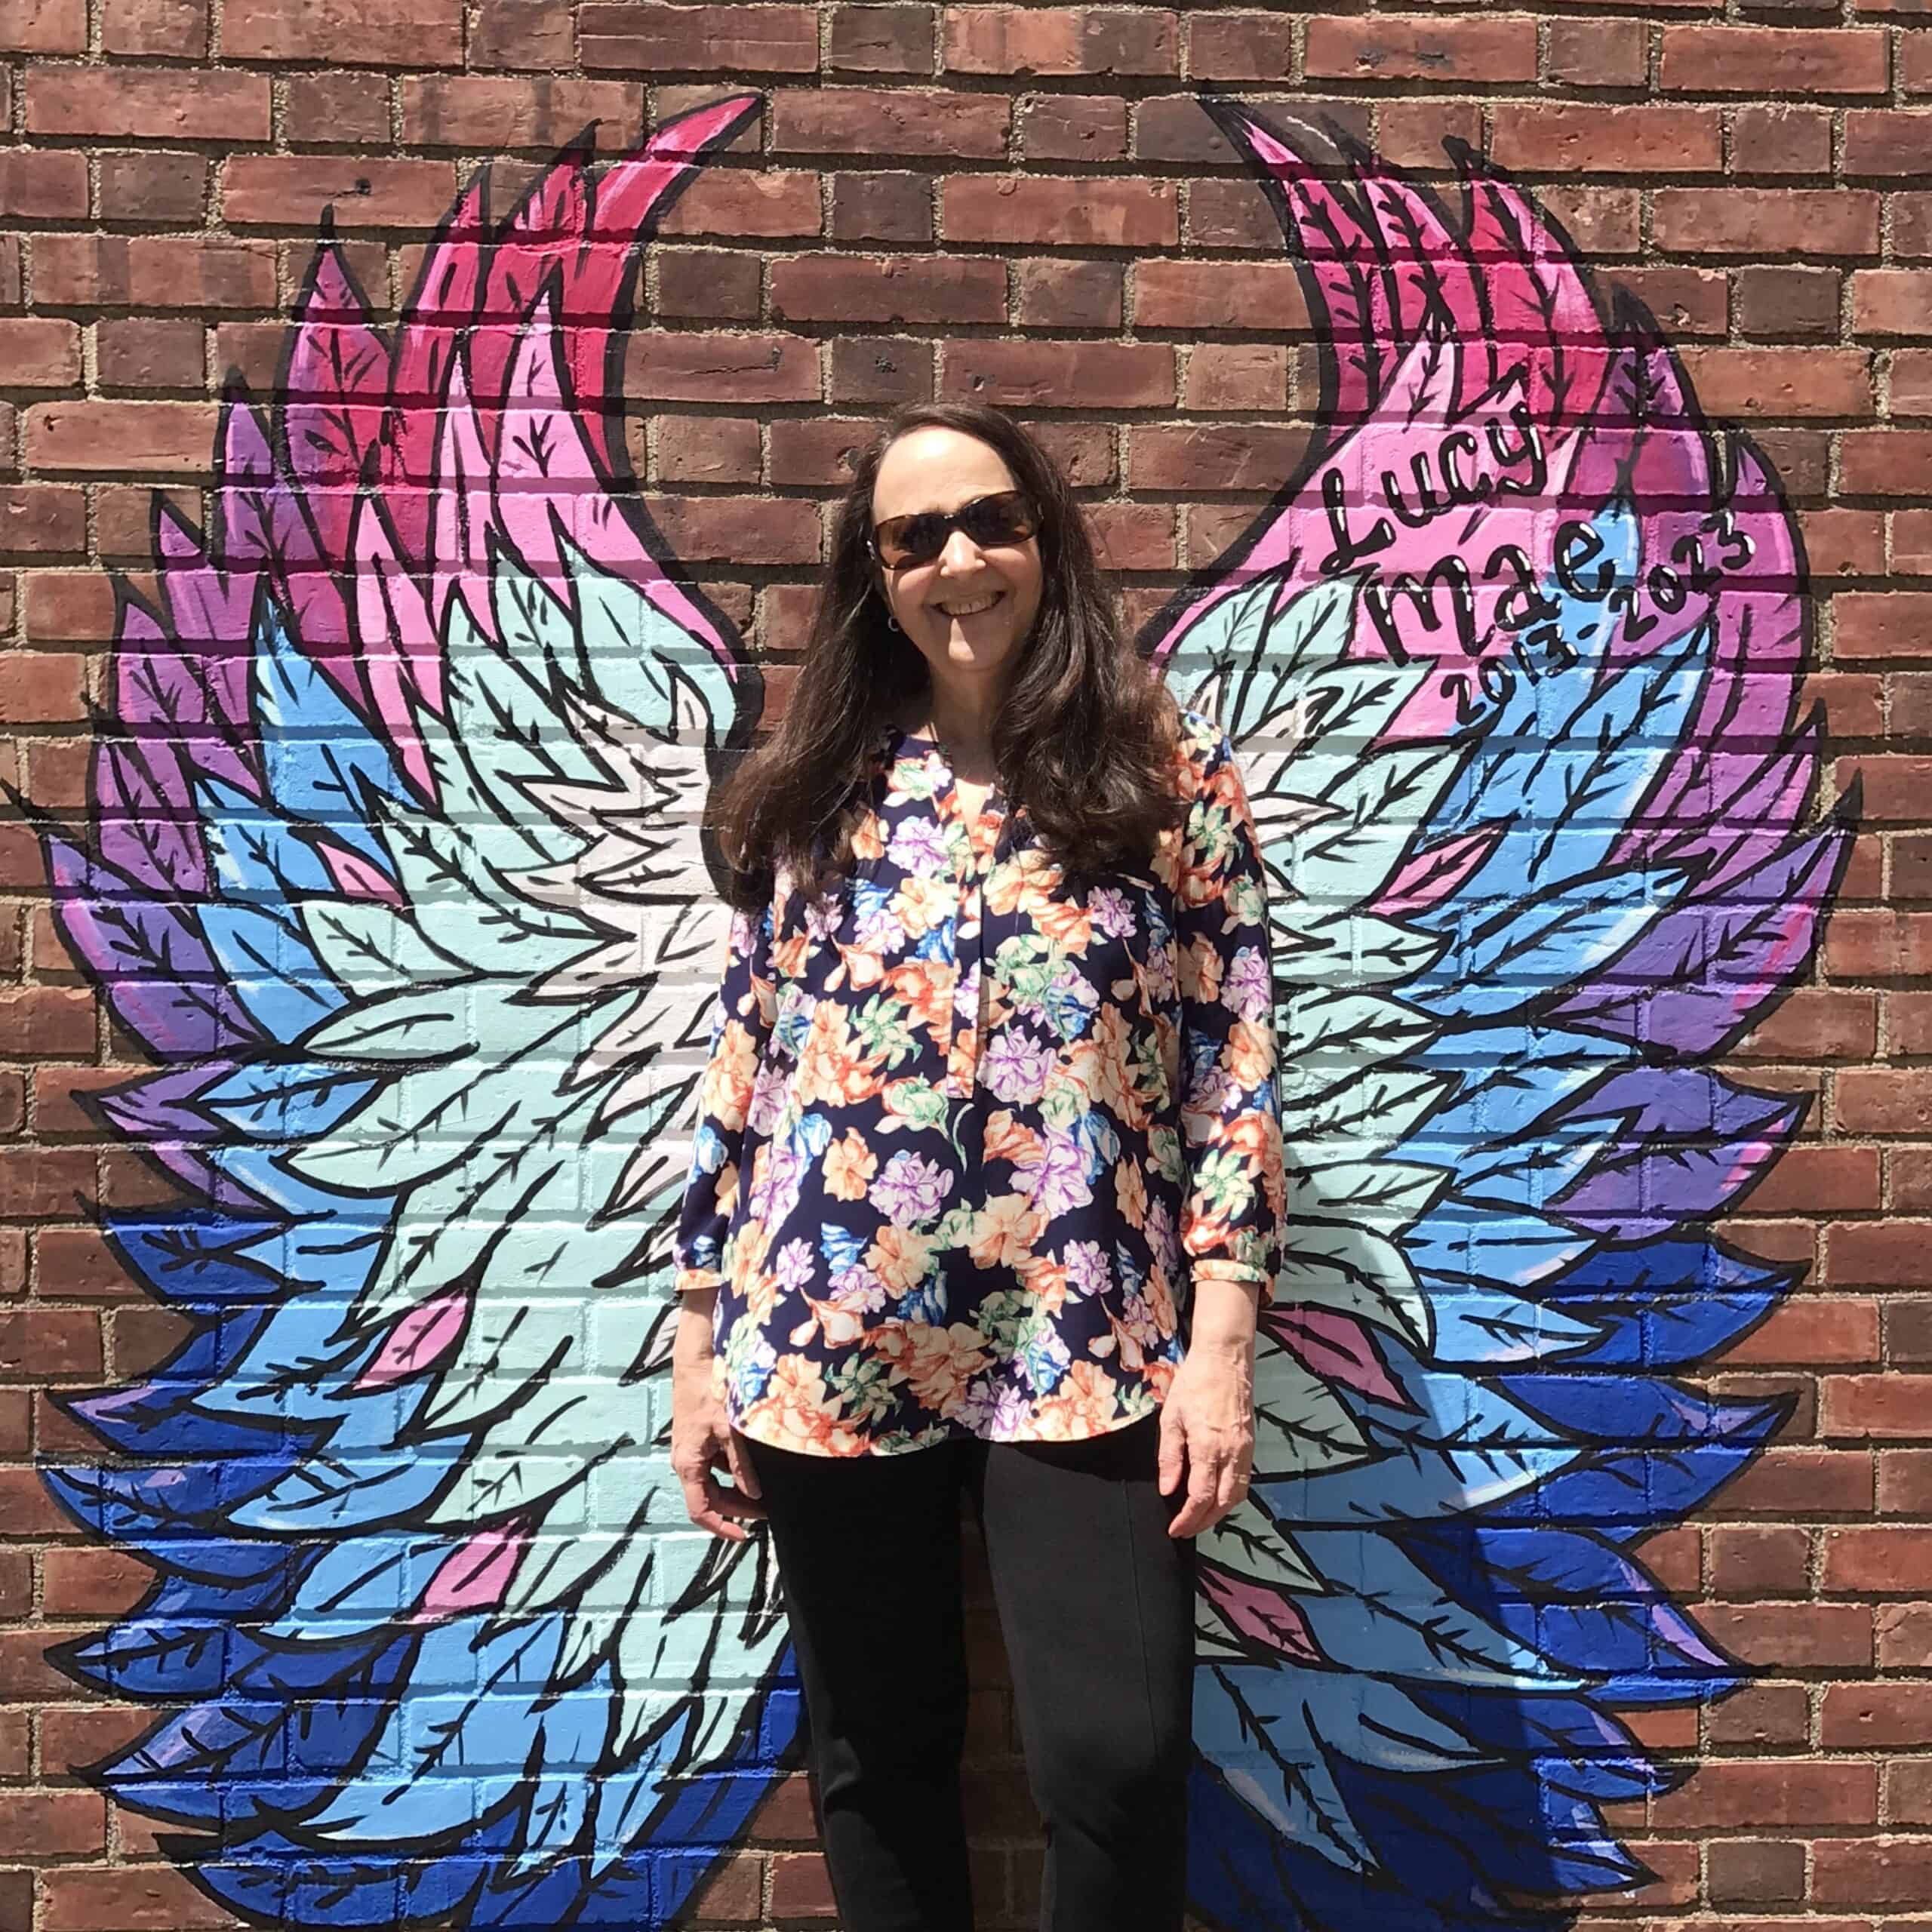 Melissa Brown in front of a brick wall with painted bright colored angel wings behind her